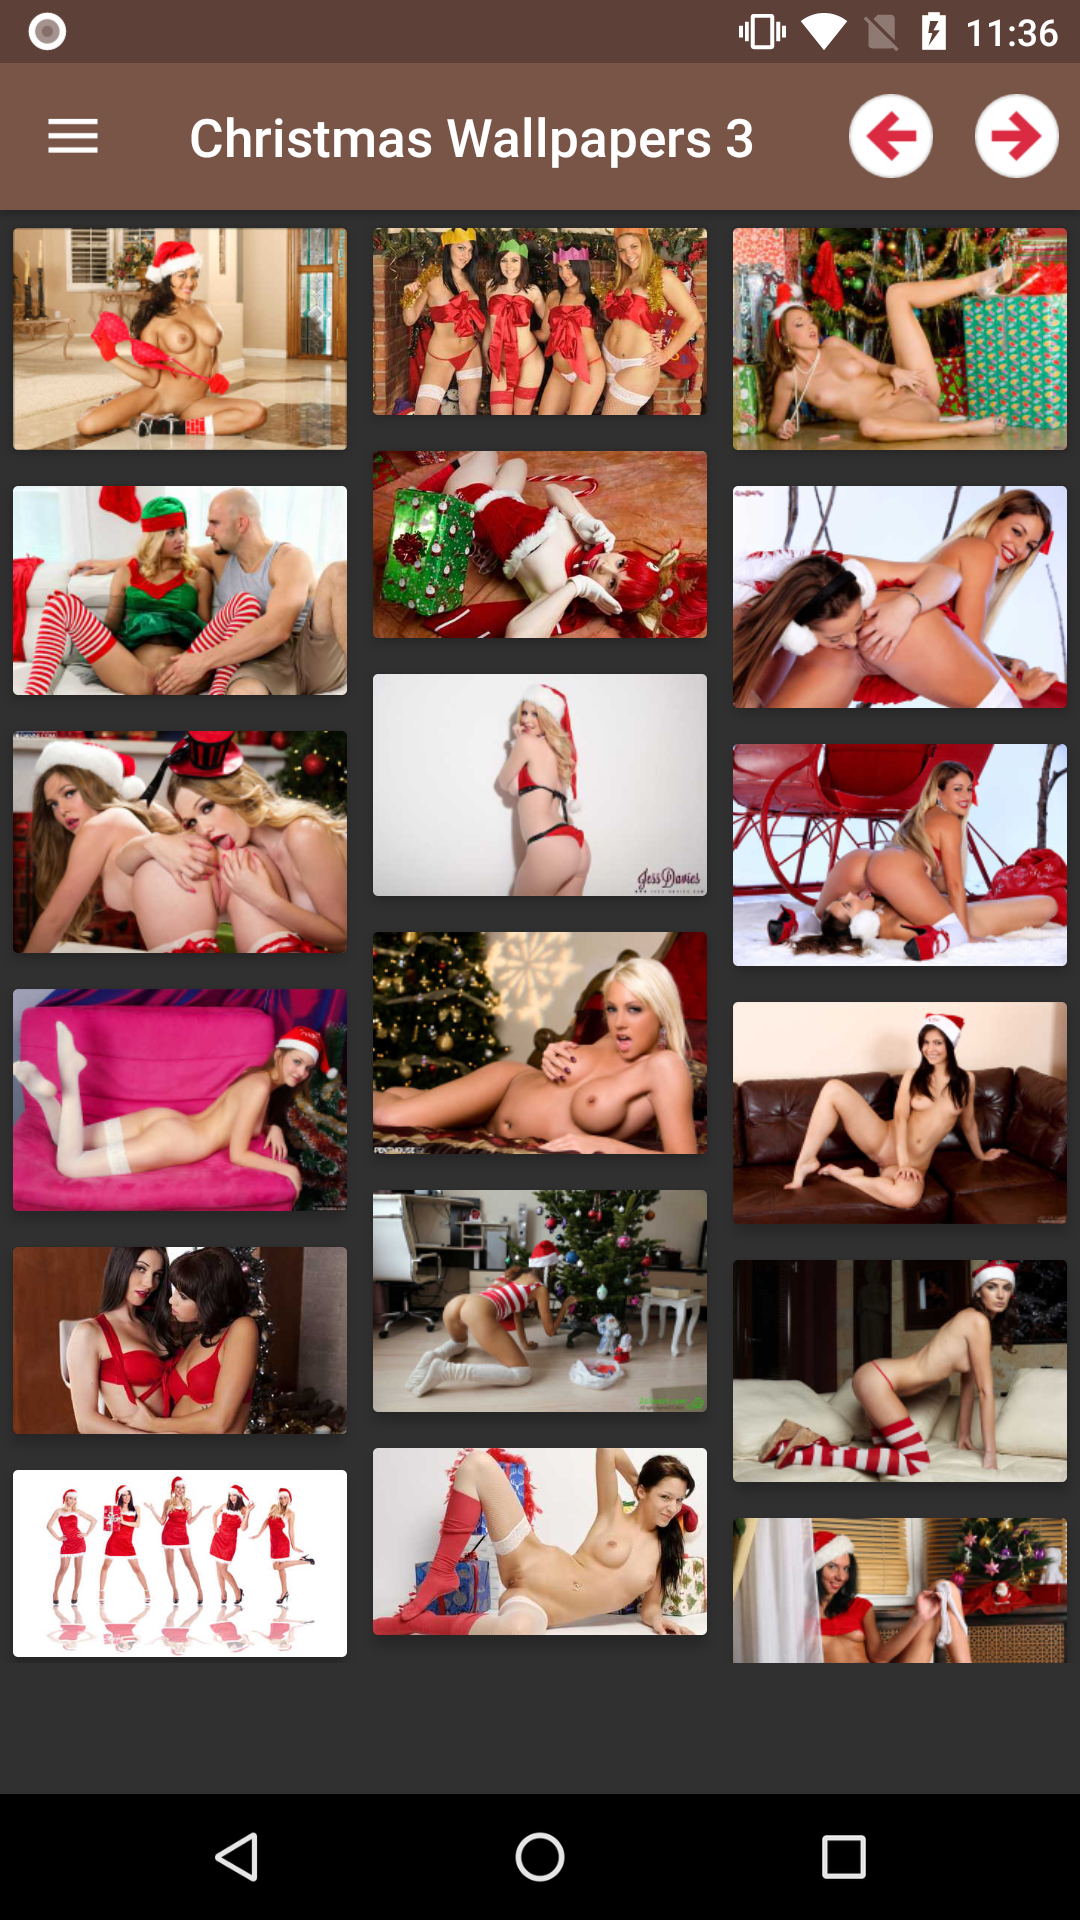 Sexy Christmas Wallpapers 2 apk,shemale,wallpapers,holidays,backgrounds,comics,for,apps,adult,henti,sexpedition,caprice,dreams,best,hentai,shrinking,porn,download,pic,erotic,excuses,sexy,android,watching